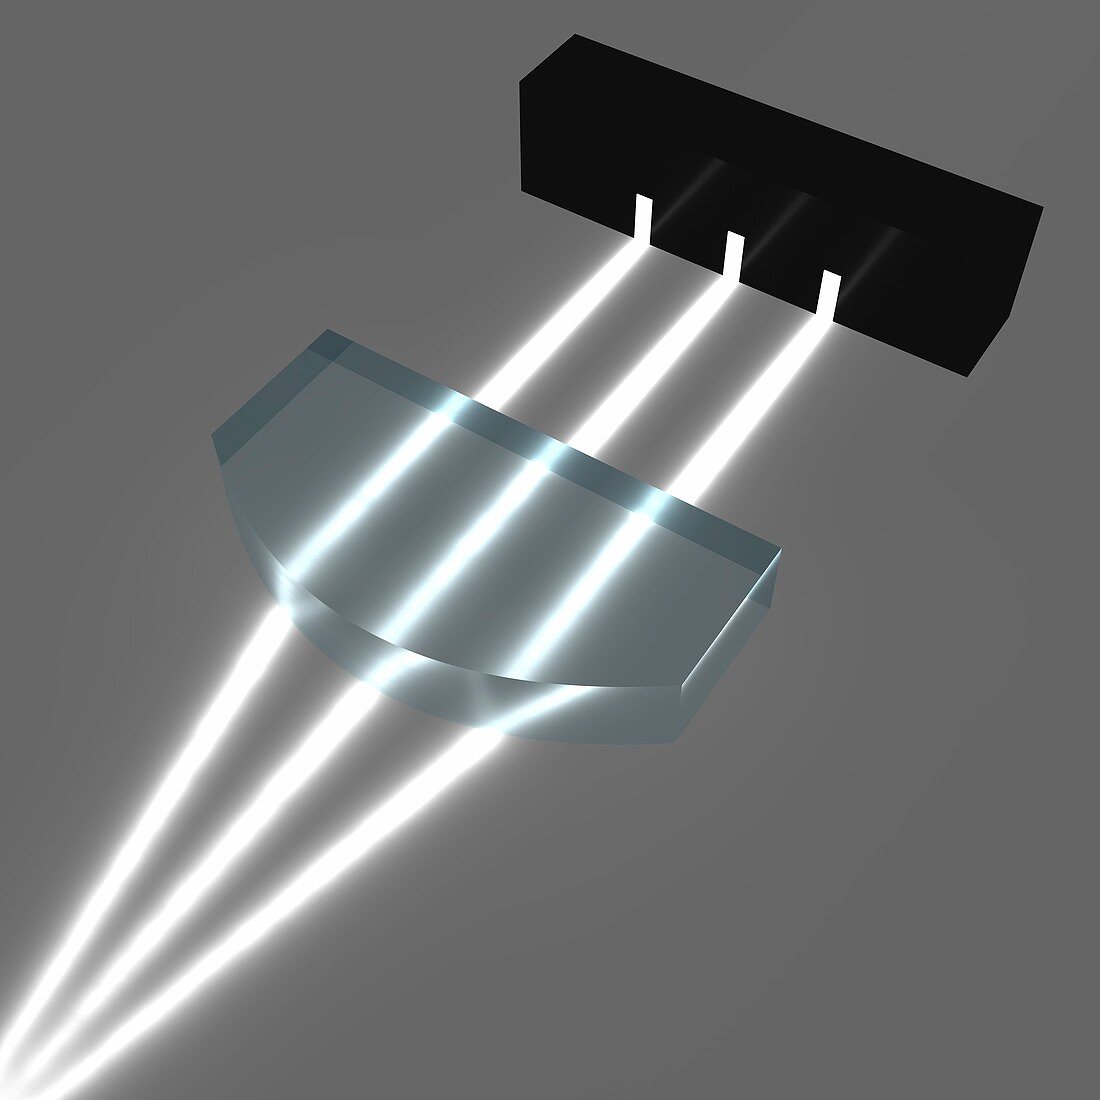 Light refraction with plano-convex lens